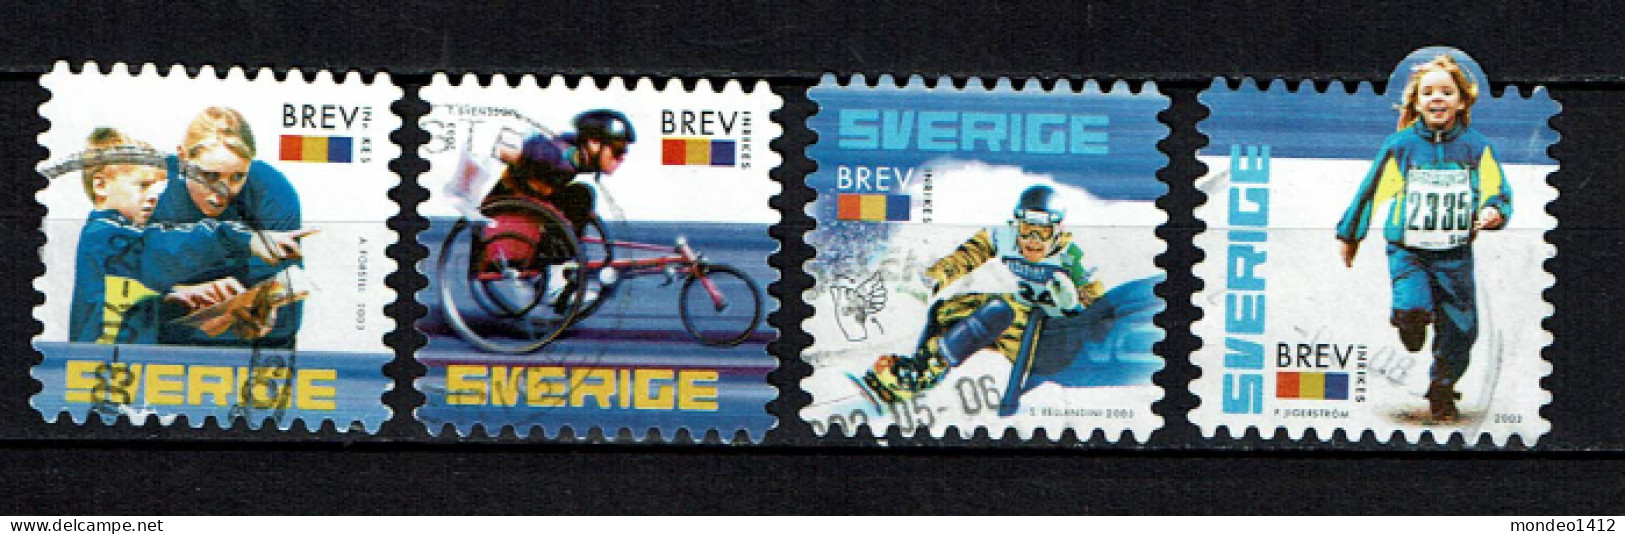 Sweden 2003 - Anniversary Of The Swedish Sports Federation  - Used - Gebraucht